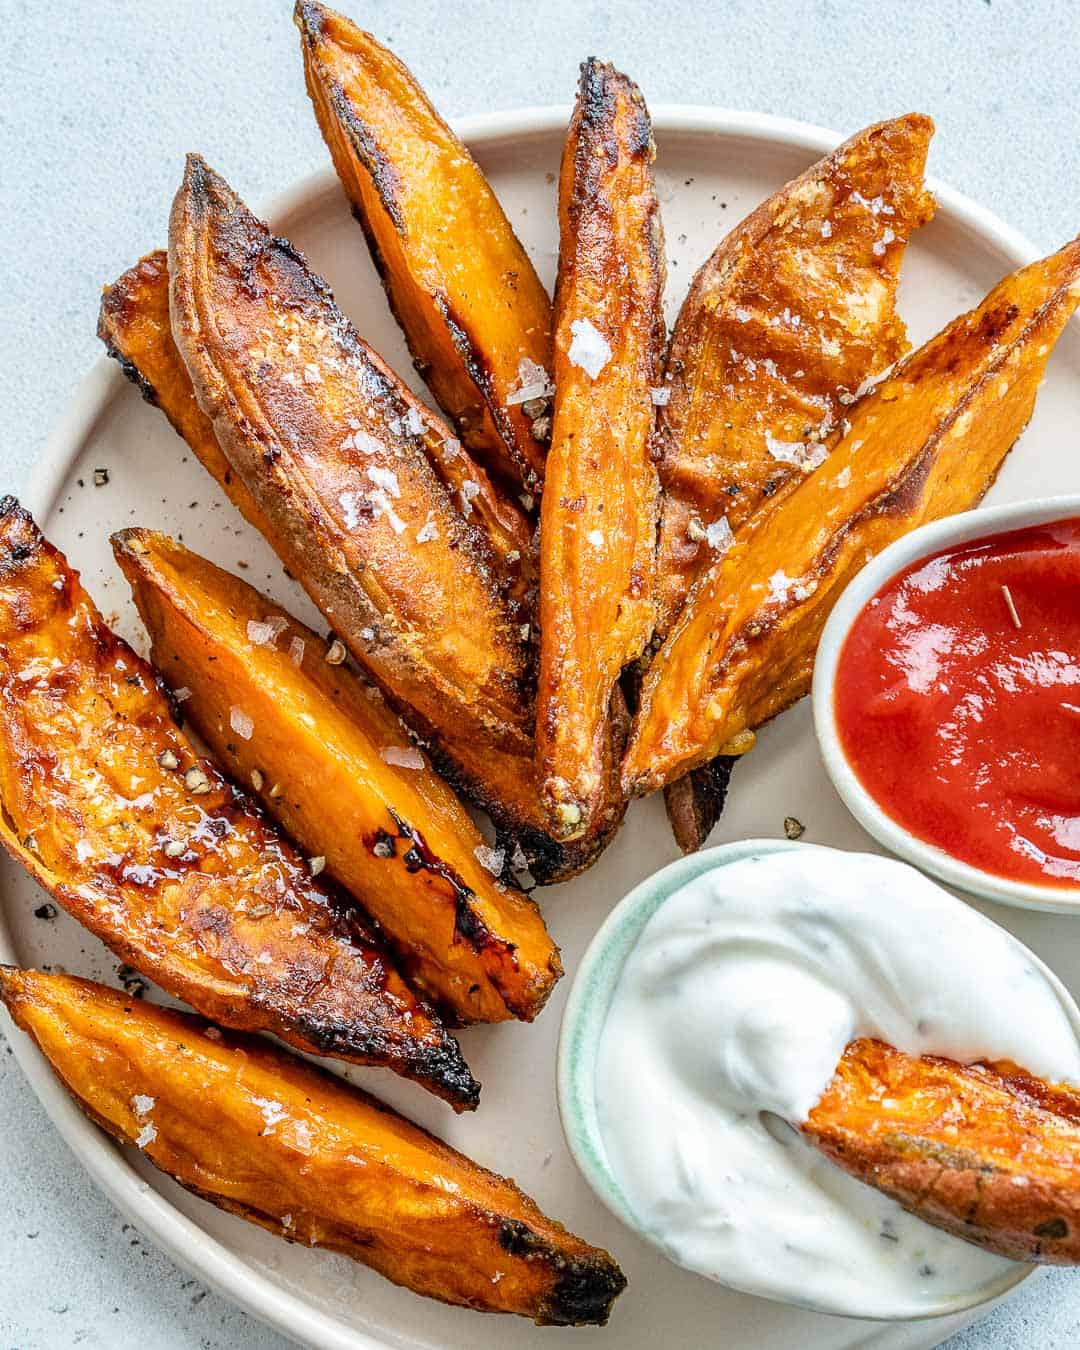 one sweet potato wedge in a small bowl of ranch dip